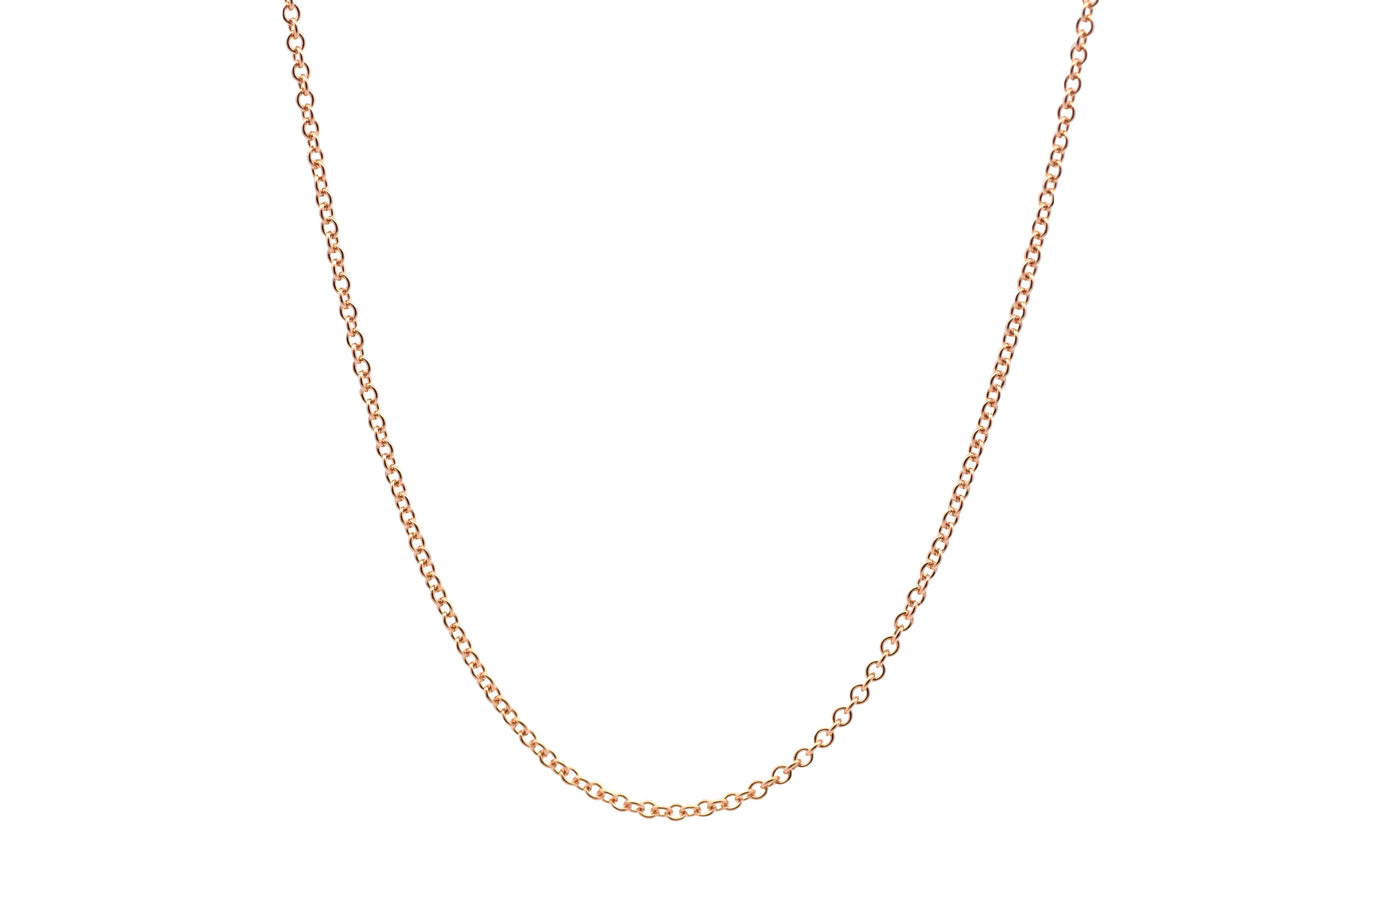 Cable Chain in Rose Gold